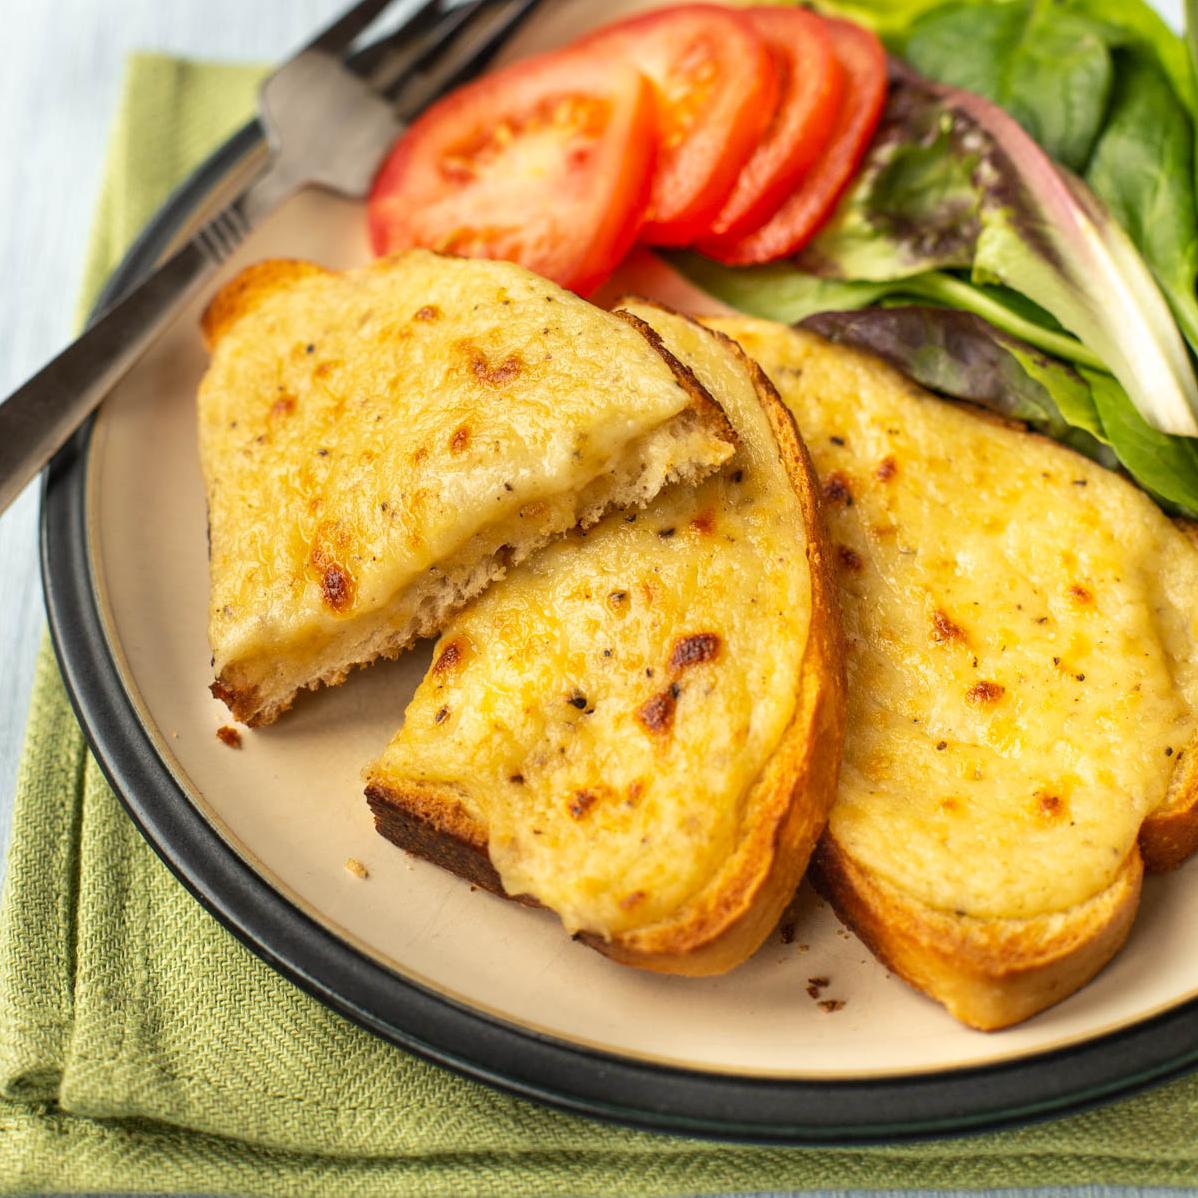  Just like snowflakes, no two Welsh Rarebit recipes are the same.